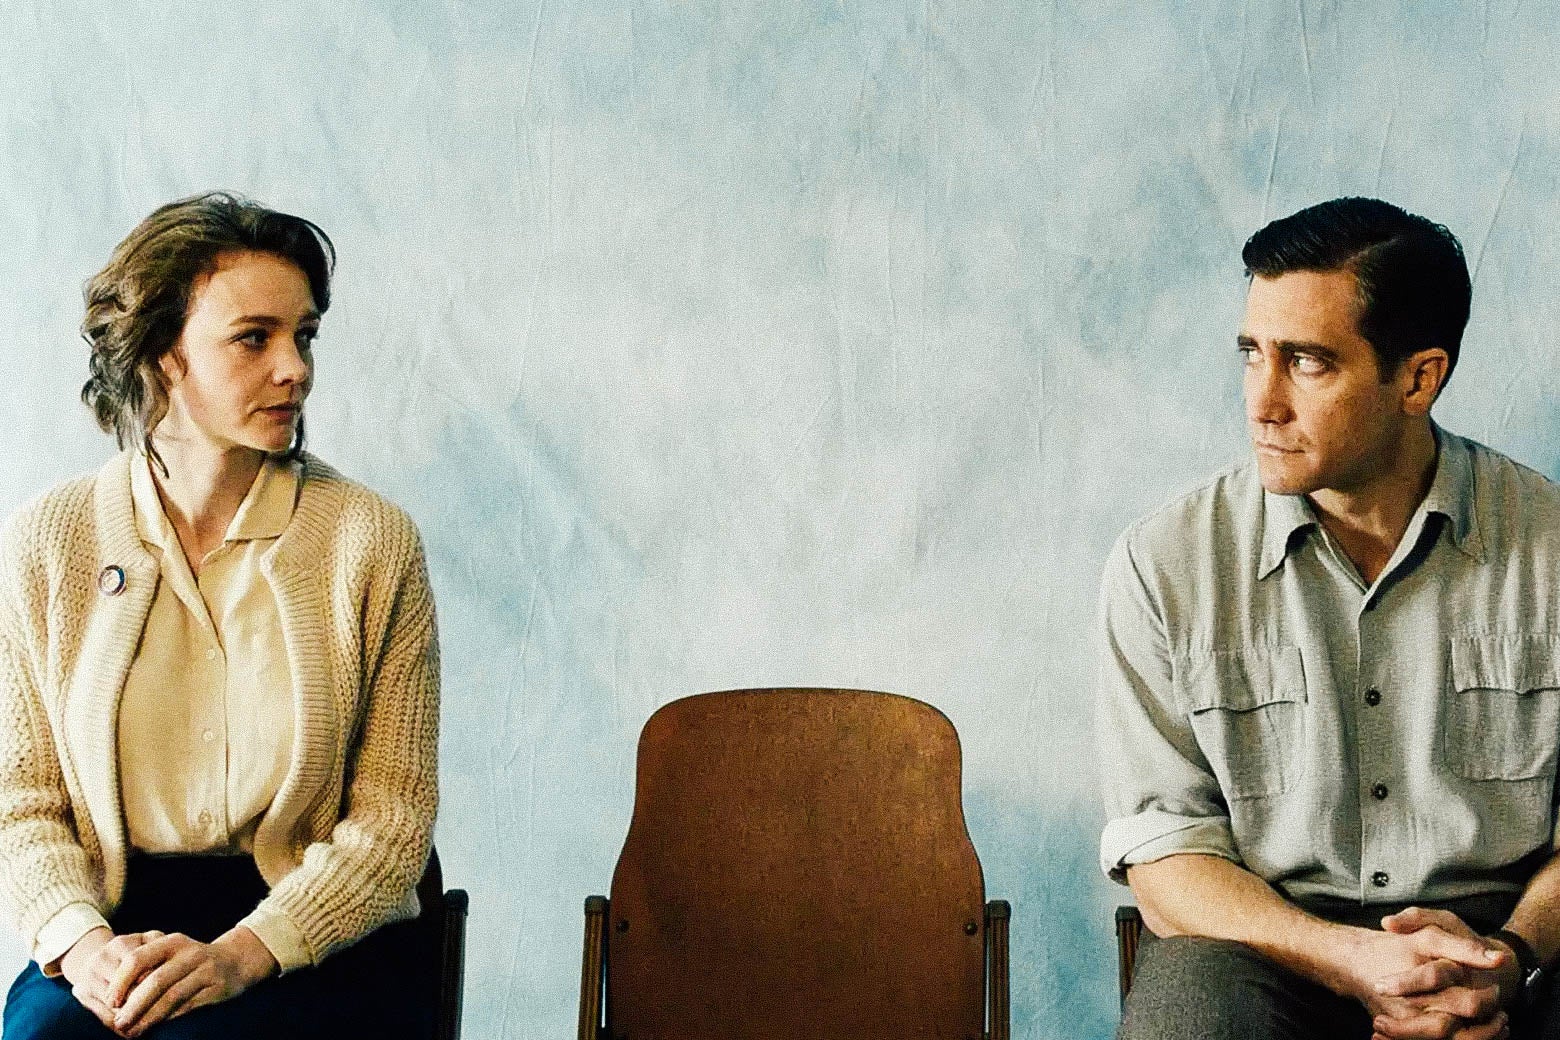 Carey Mulligan and Jake Gyllenhaal stare at each other while seated on either side of an empty chair.